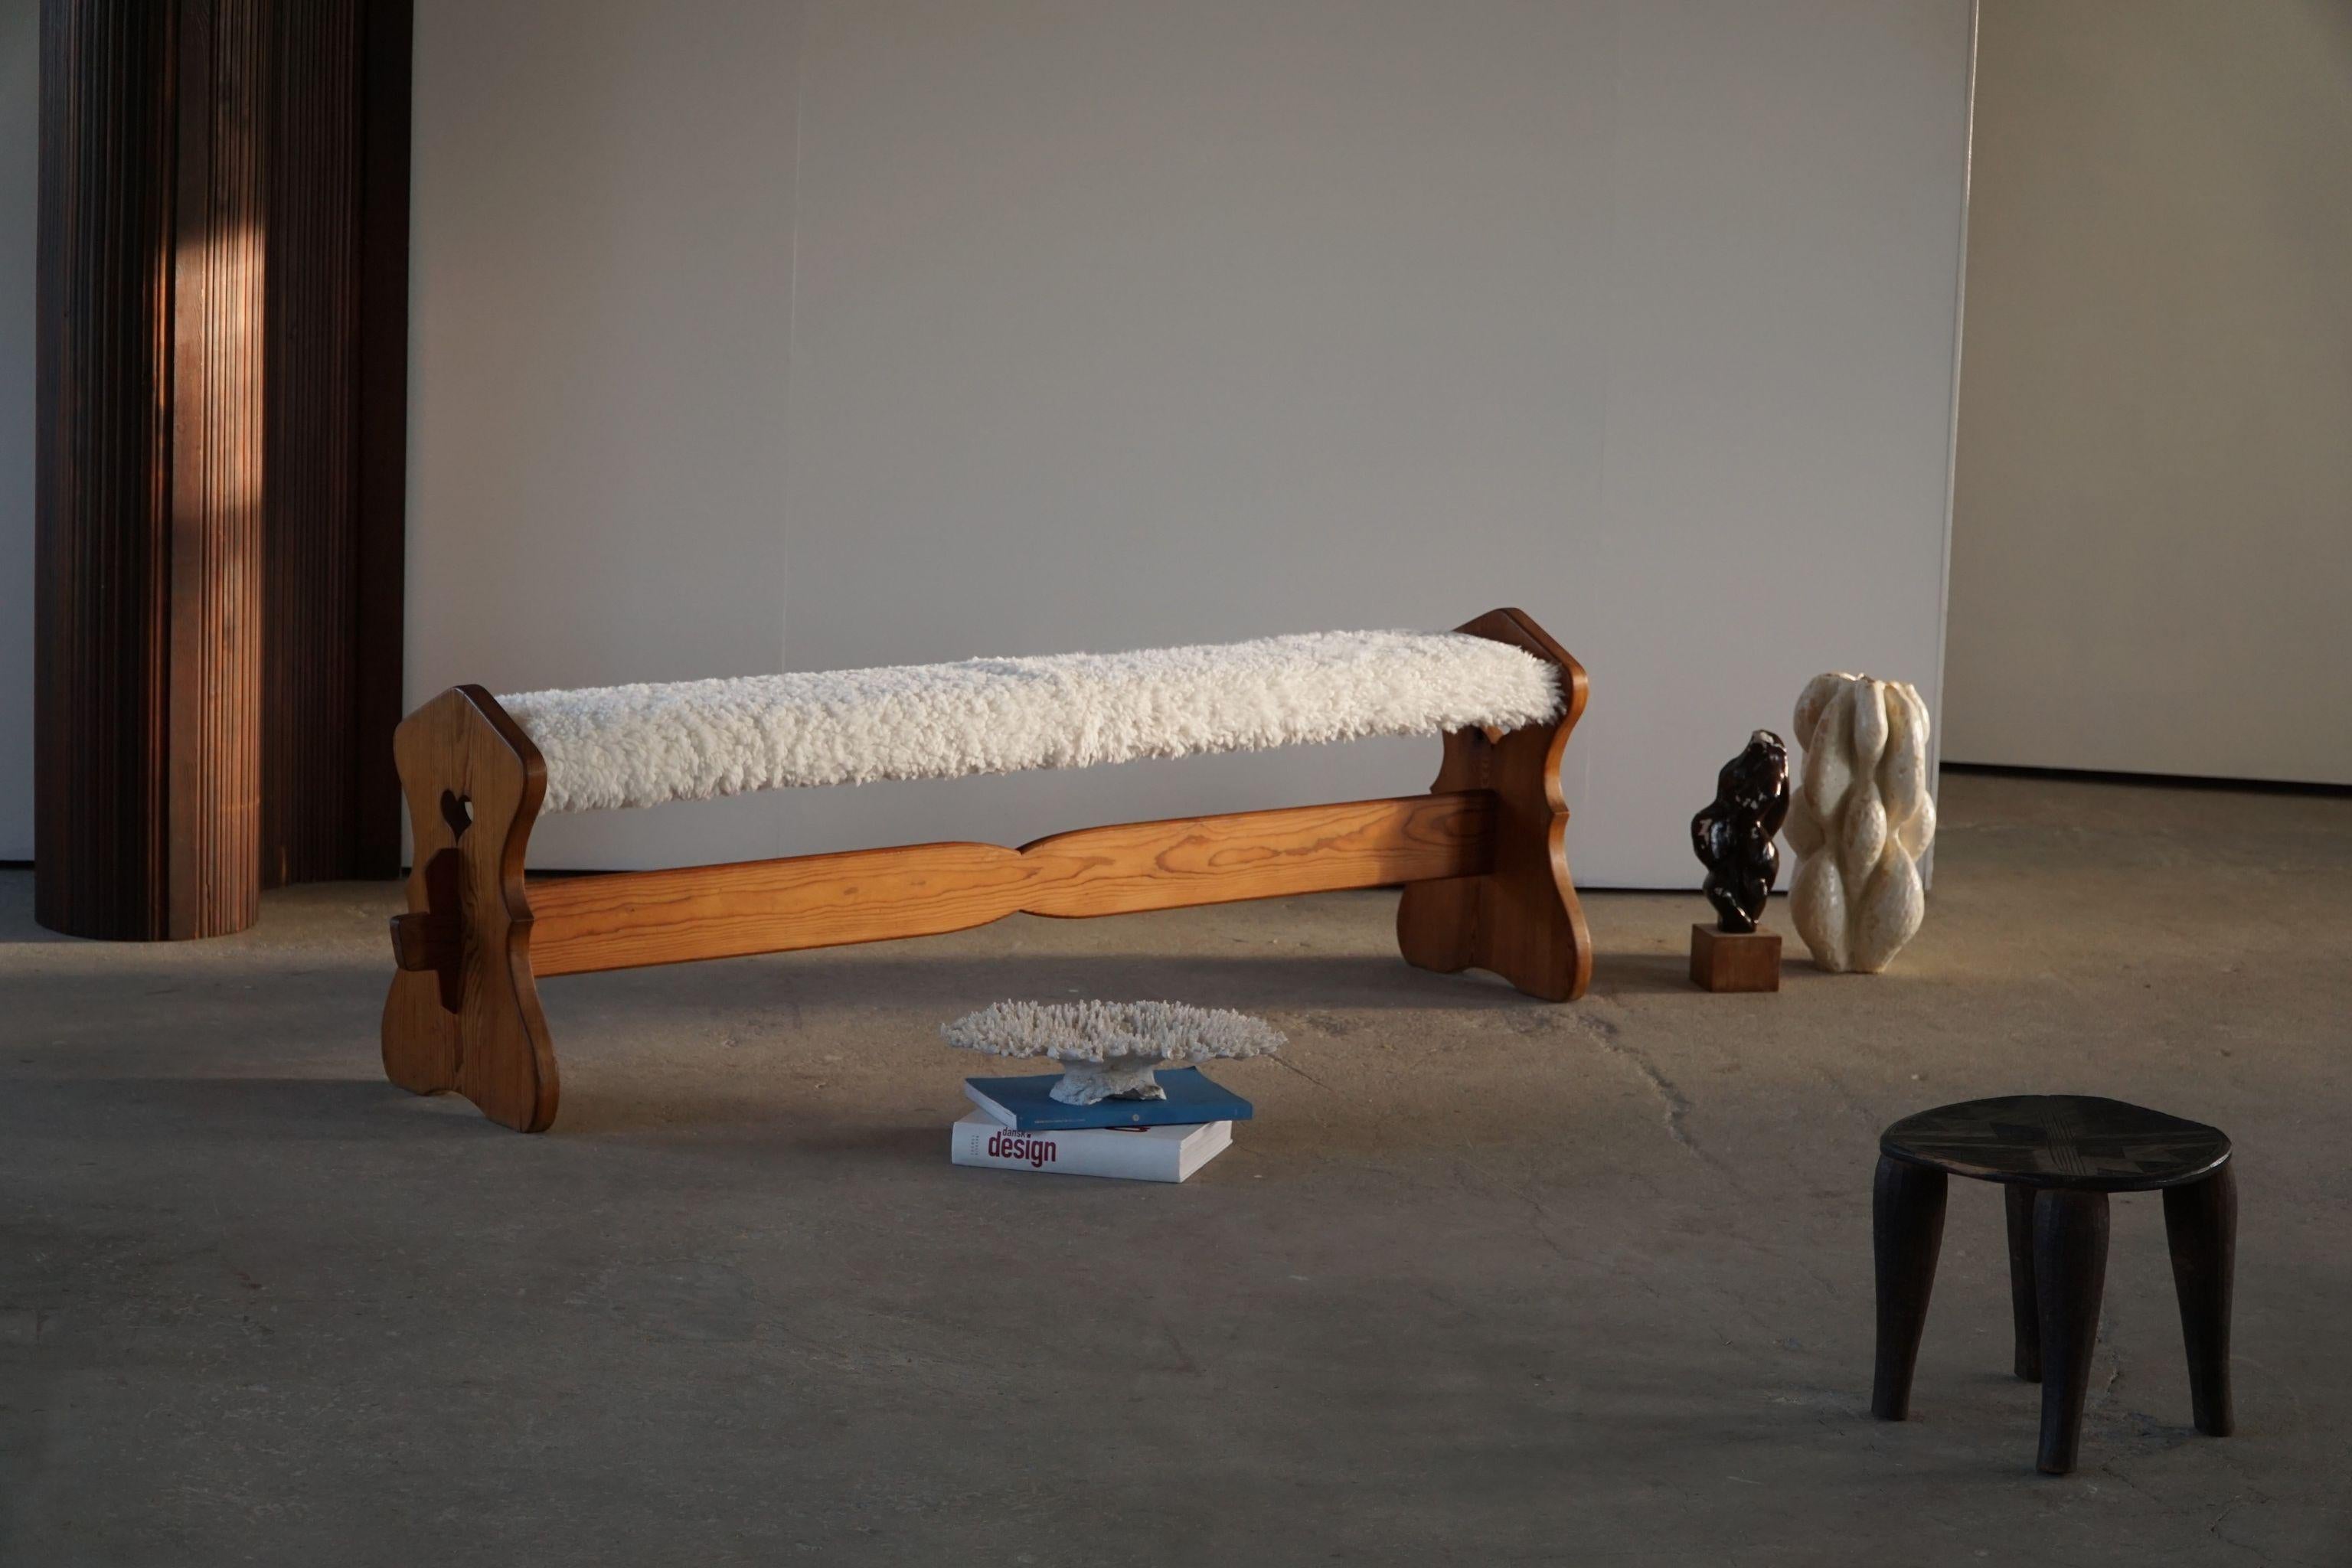 A unique sculptural folk art bench in solid pine. Reupholstered in good quality shearling lambskin. Handcrafted by an unknown cabinetmaker in Sweden, ca 1940s. This beautiful bench can be used in a hallway, around the dining table or a sculptural